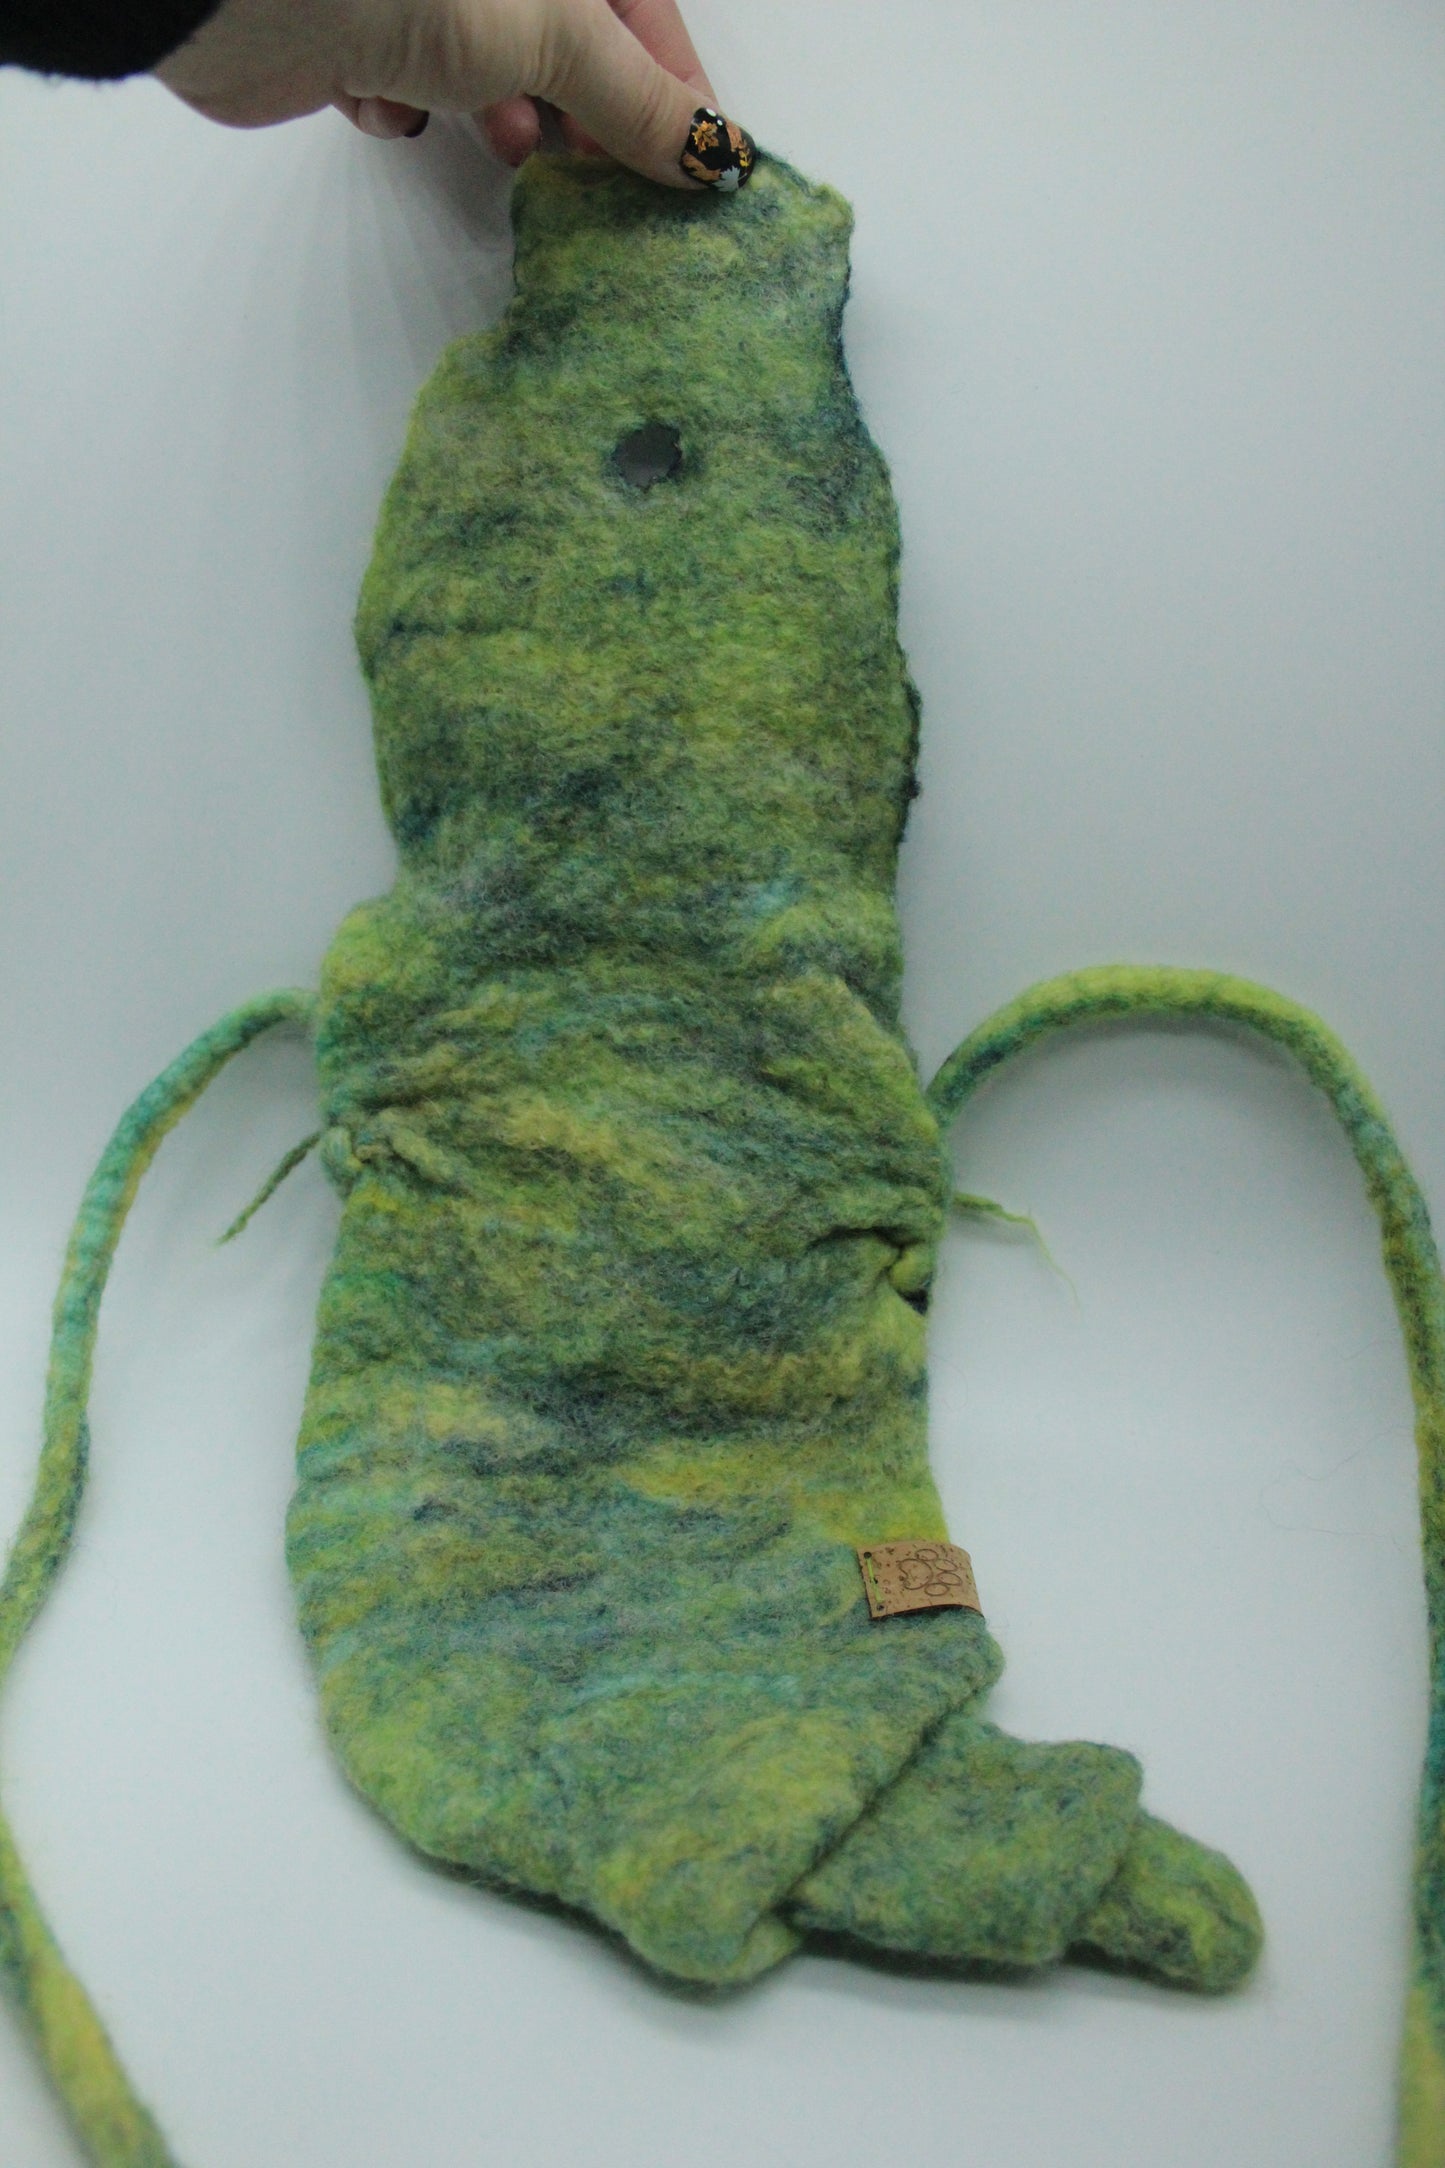 Green Elf Bag With Strap